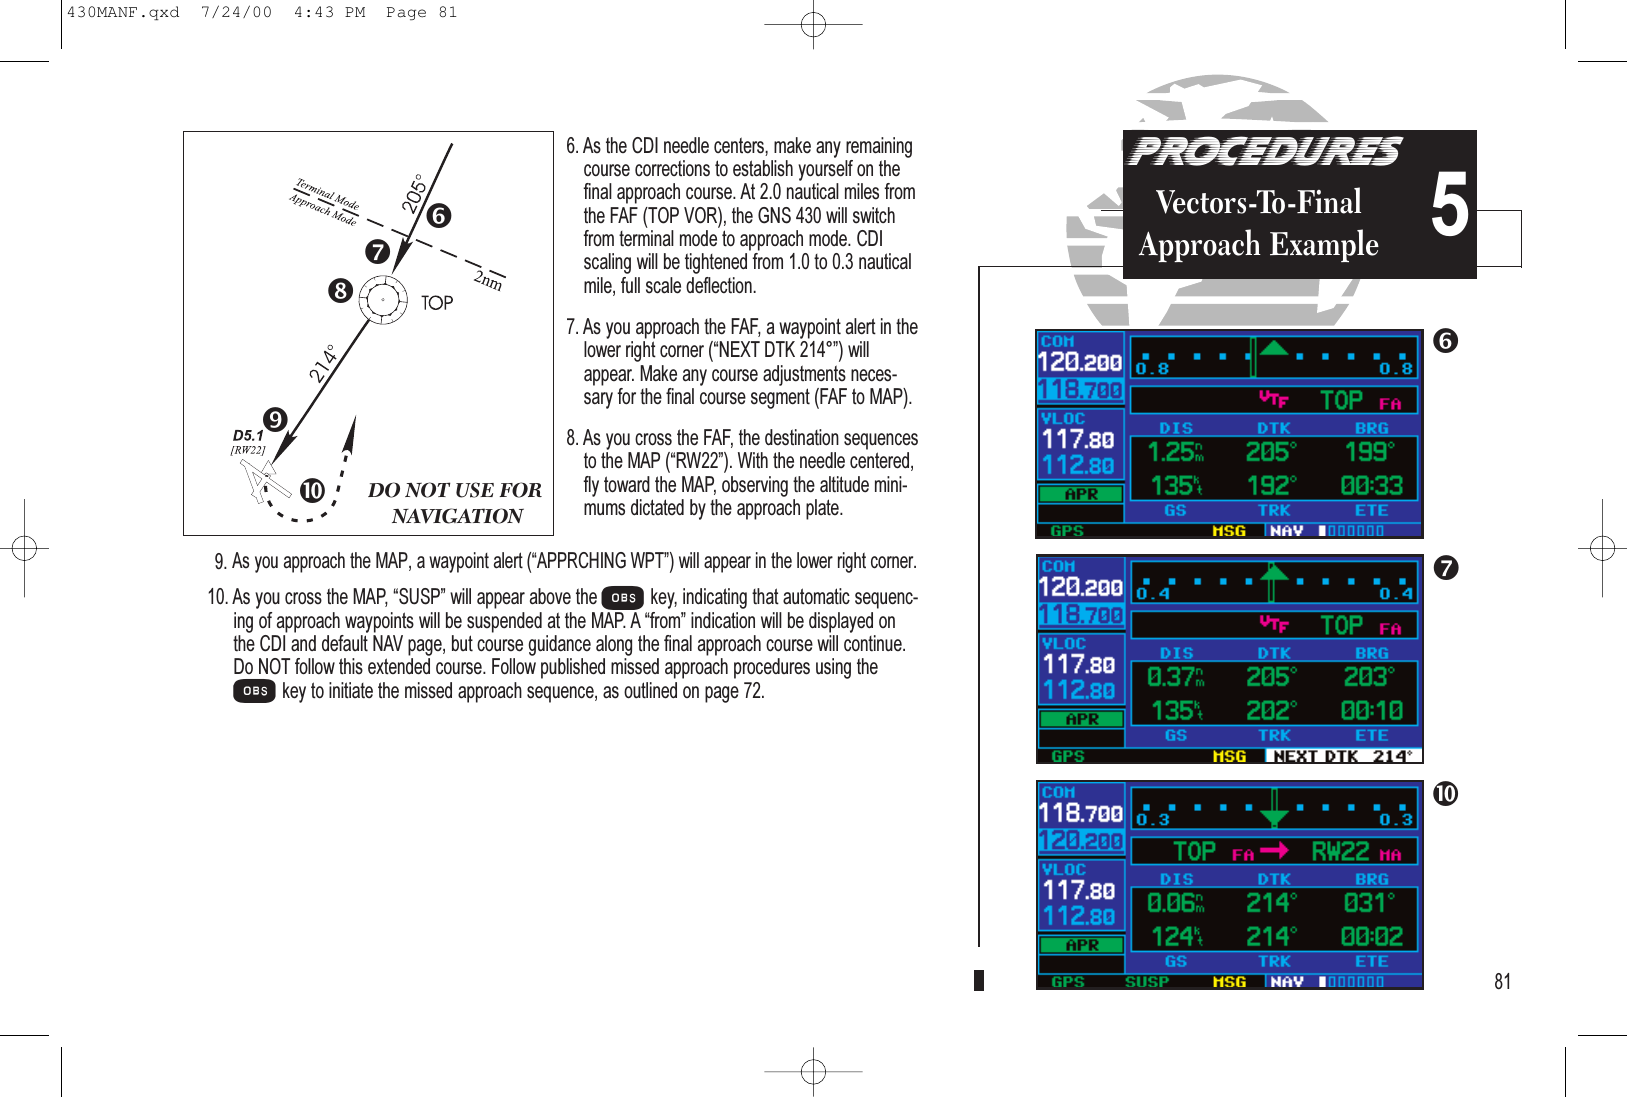 PROCEDURESVectors-To-FinalApproach Example 56. As the CDI needle centers, make any remainingcourse corrections to establish yourself on thefinal approach course. At 2.0 nautical miles fromthe FAF (TOP VOR), the GNS 430 will switchfrom terminal mode to approach mode. CDIscaling will be tightened from 1.0 to 0.3 nauticalmile, full scale deflection.7. As you approach the FAF, a waypoint alert in thelower right corner (NEXT DTK 214°) willappear. Make any course adjustments neces-sary for the final course segment (FAF to MAP).8. As you cross the FAF, the destination sequencesto the MAP (RW22). With the needle centered,fly toward the MAP, observing the altitude mini-mums dictated by the approach plate.9. As you approach the MAP, a waypoint alert (APPRCHING WPT) will appear in the lower right corner. 10. As you cross the MAP, SUSP will appear above the Okey, indicating that automatic sequenc-ing of approach waypoints will be suspended at the MAP. A from indication will be displayed onthe CDI and default NAV page, but course guidance along the final approach course will continue.Do NOT follow this extended course. Follow published missed approach procedures using theOkey to initiate the missed approach sequence, as outlined on page 72.81DO NOT USE FORNAVIGATION430MANF.qxd  7/24/00  4:43 PM  Page 81